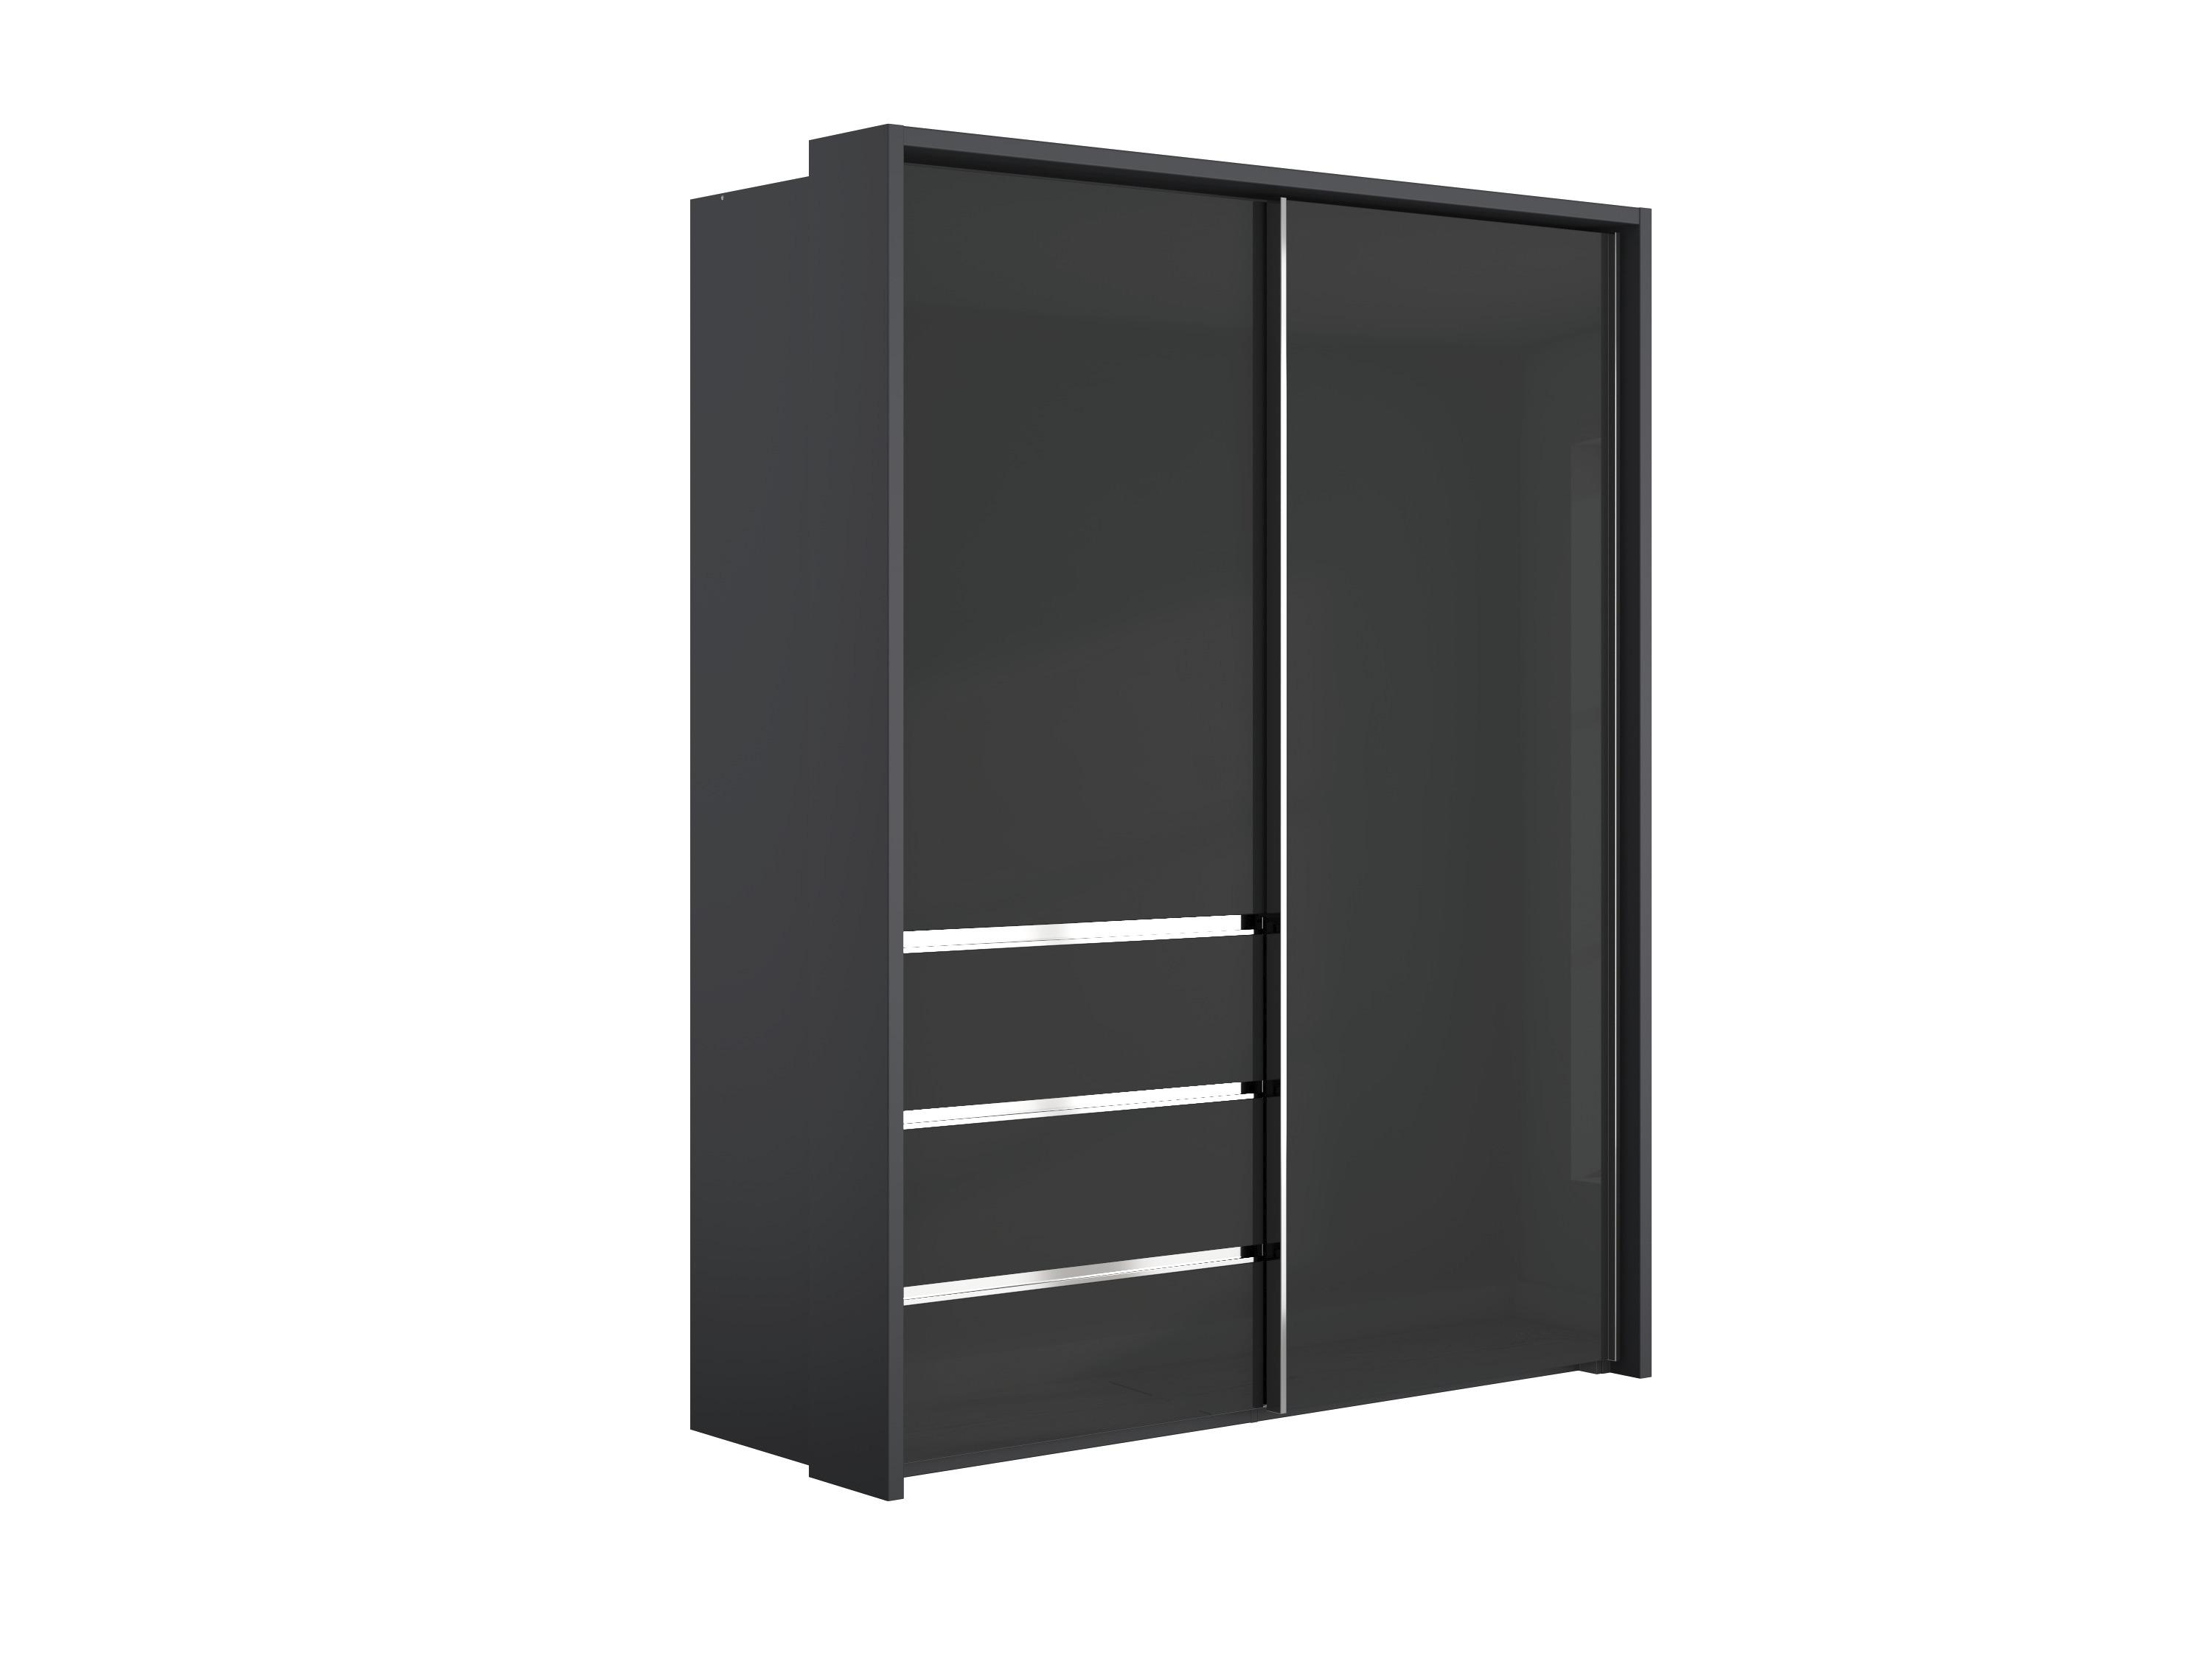 Pacifica 2 175cm 2 Door Sliding Wardrobe with 3 Drawers in Graphite/Glass Graphite on Furniture Village